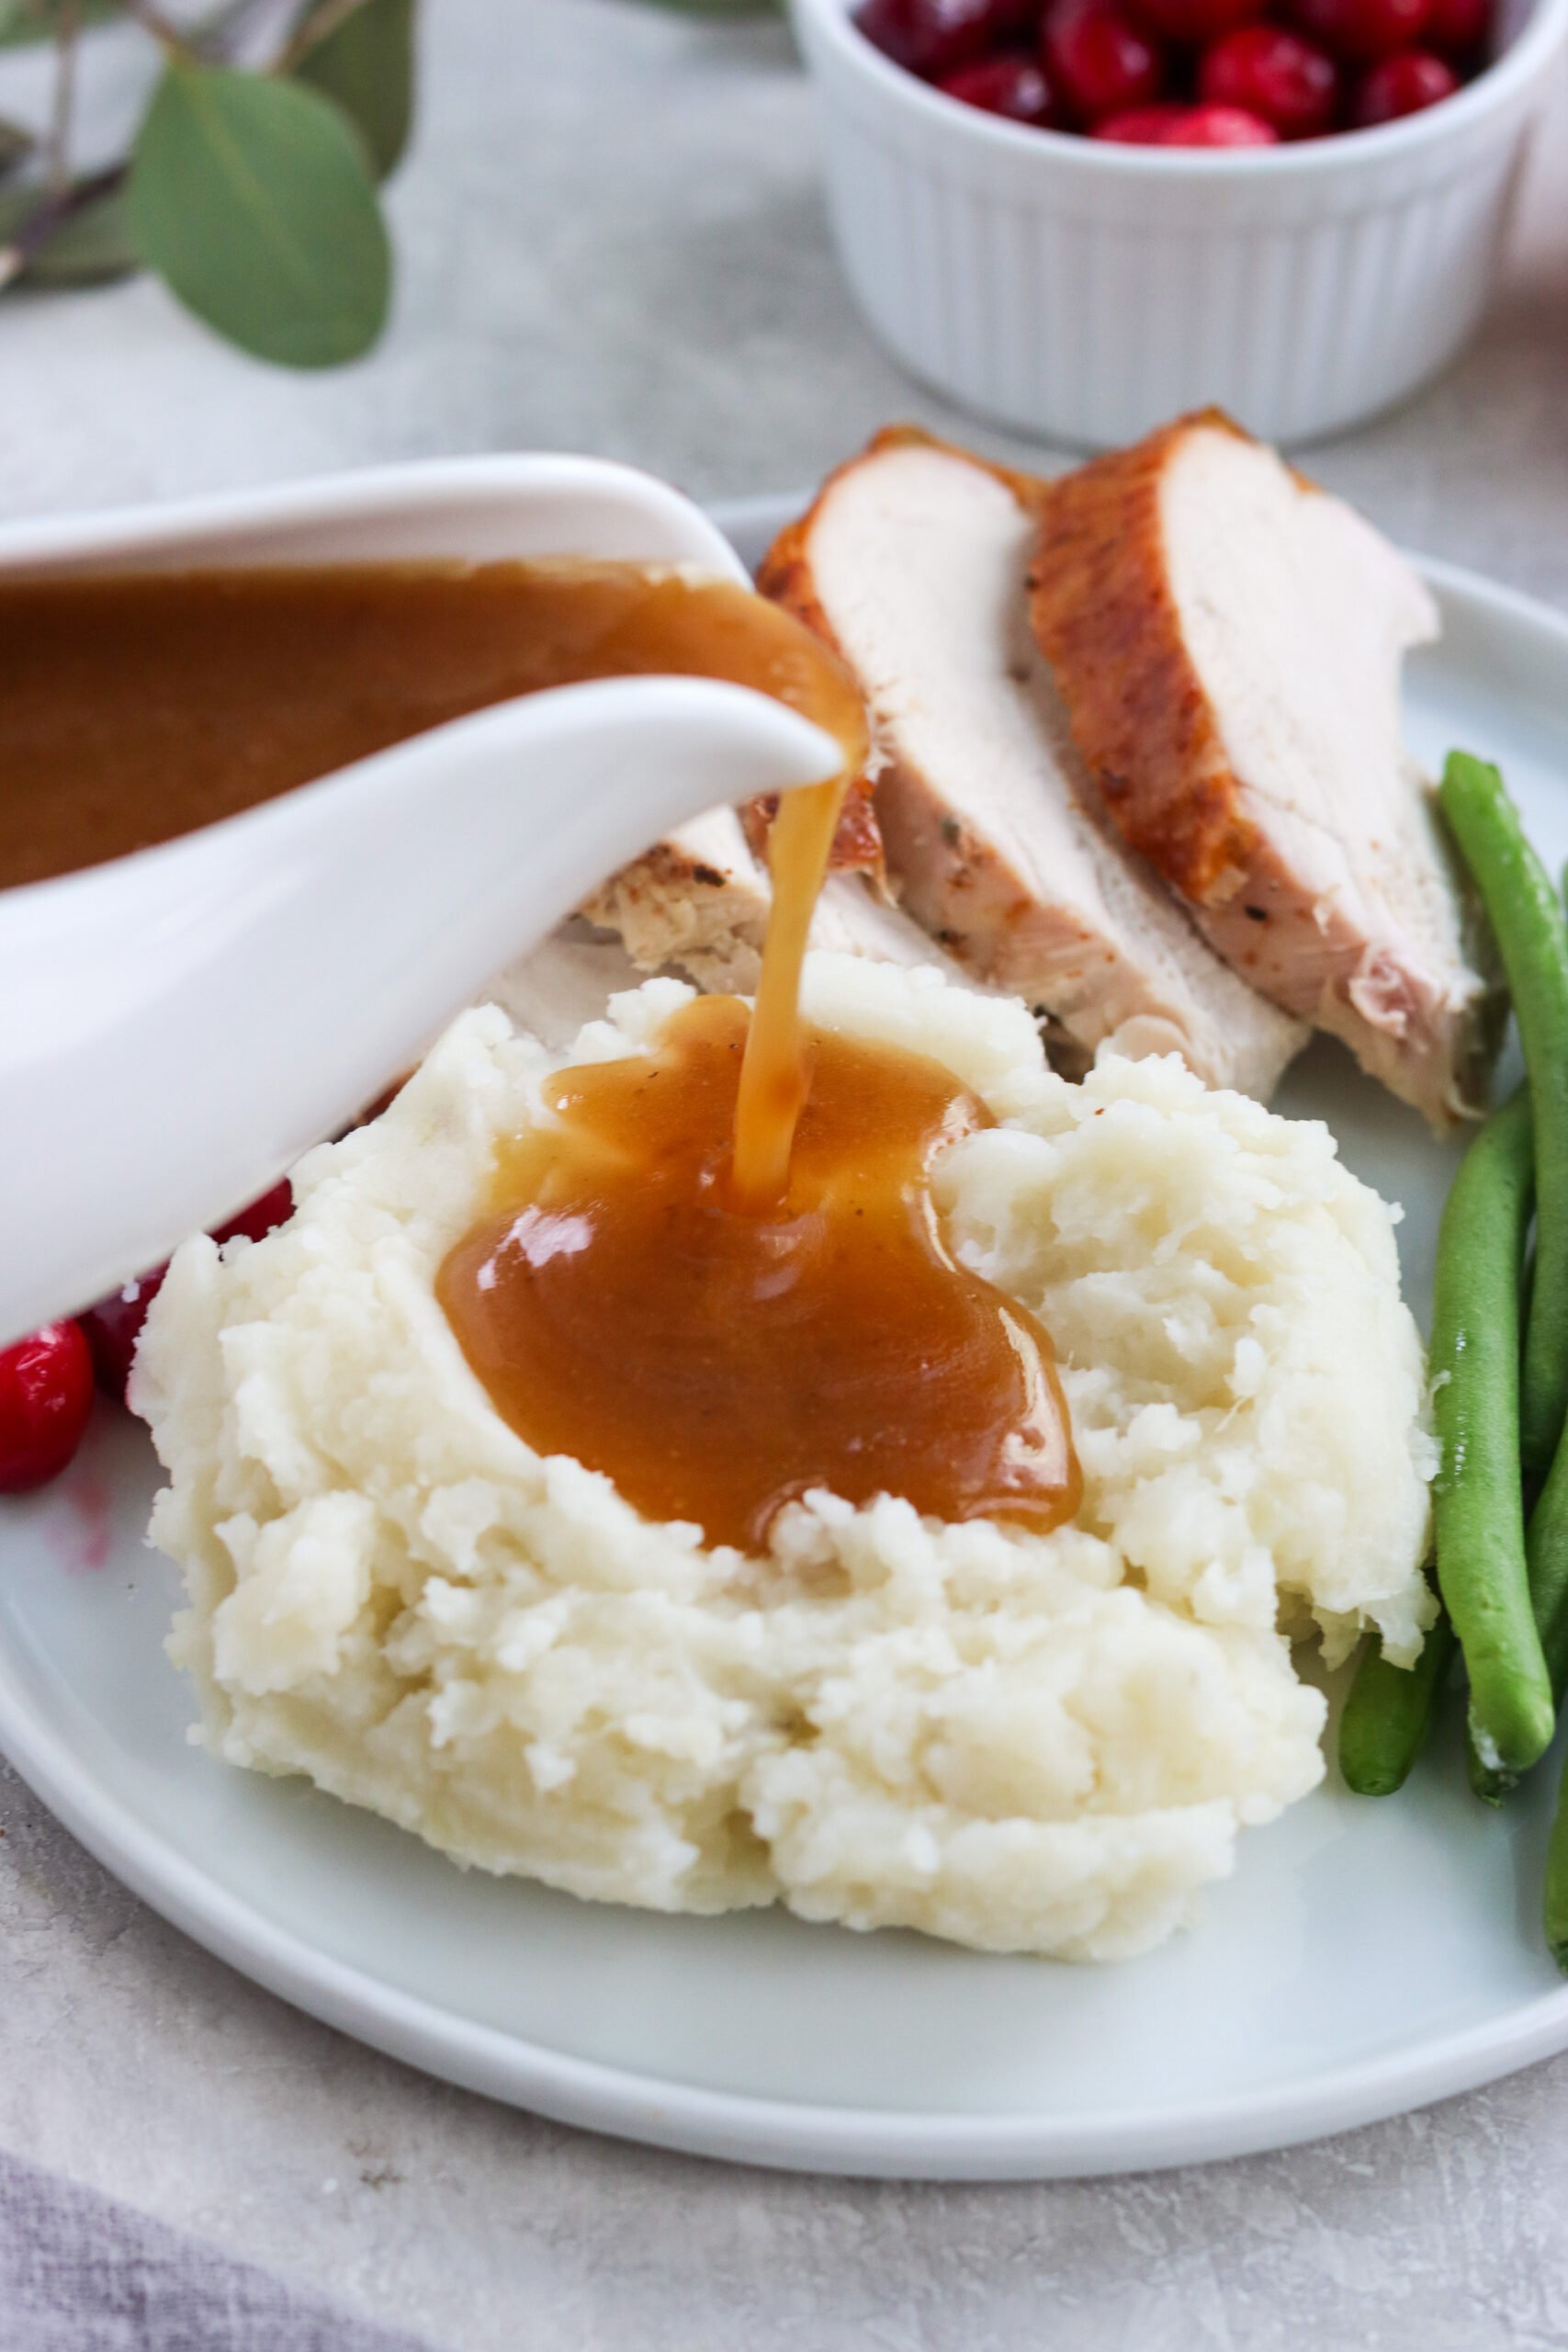 a white gravy dish full of gluten free graving pouring onto the top of mashed potatoes